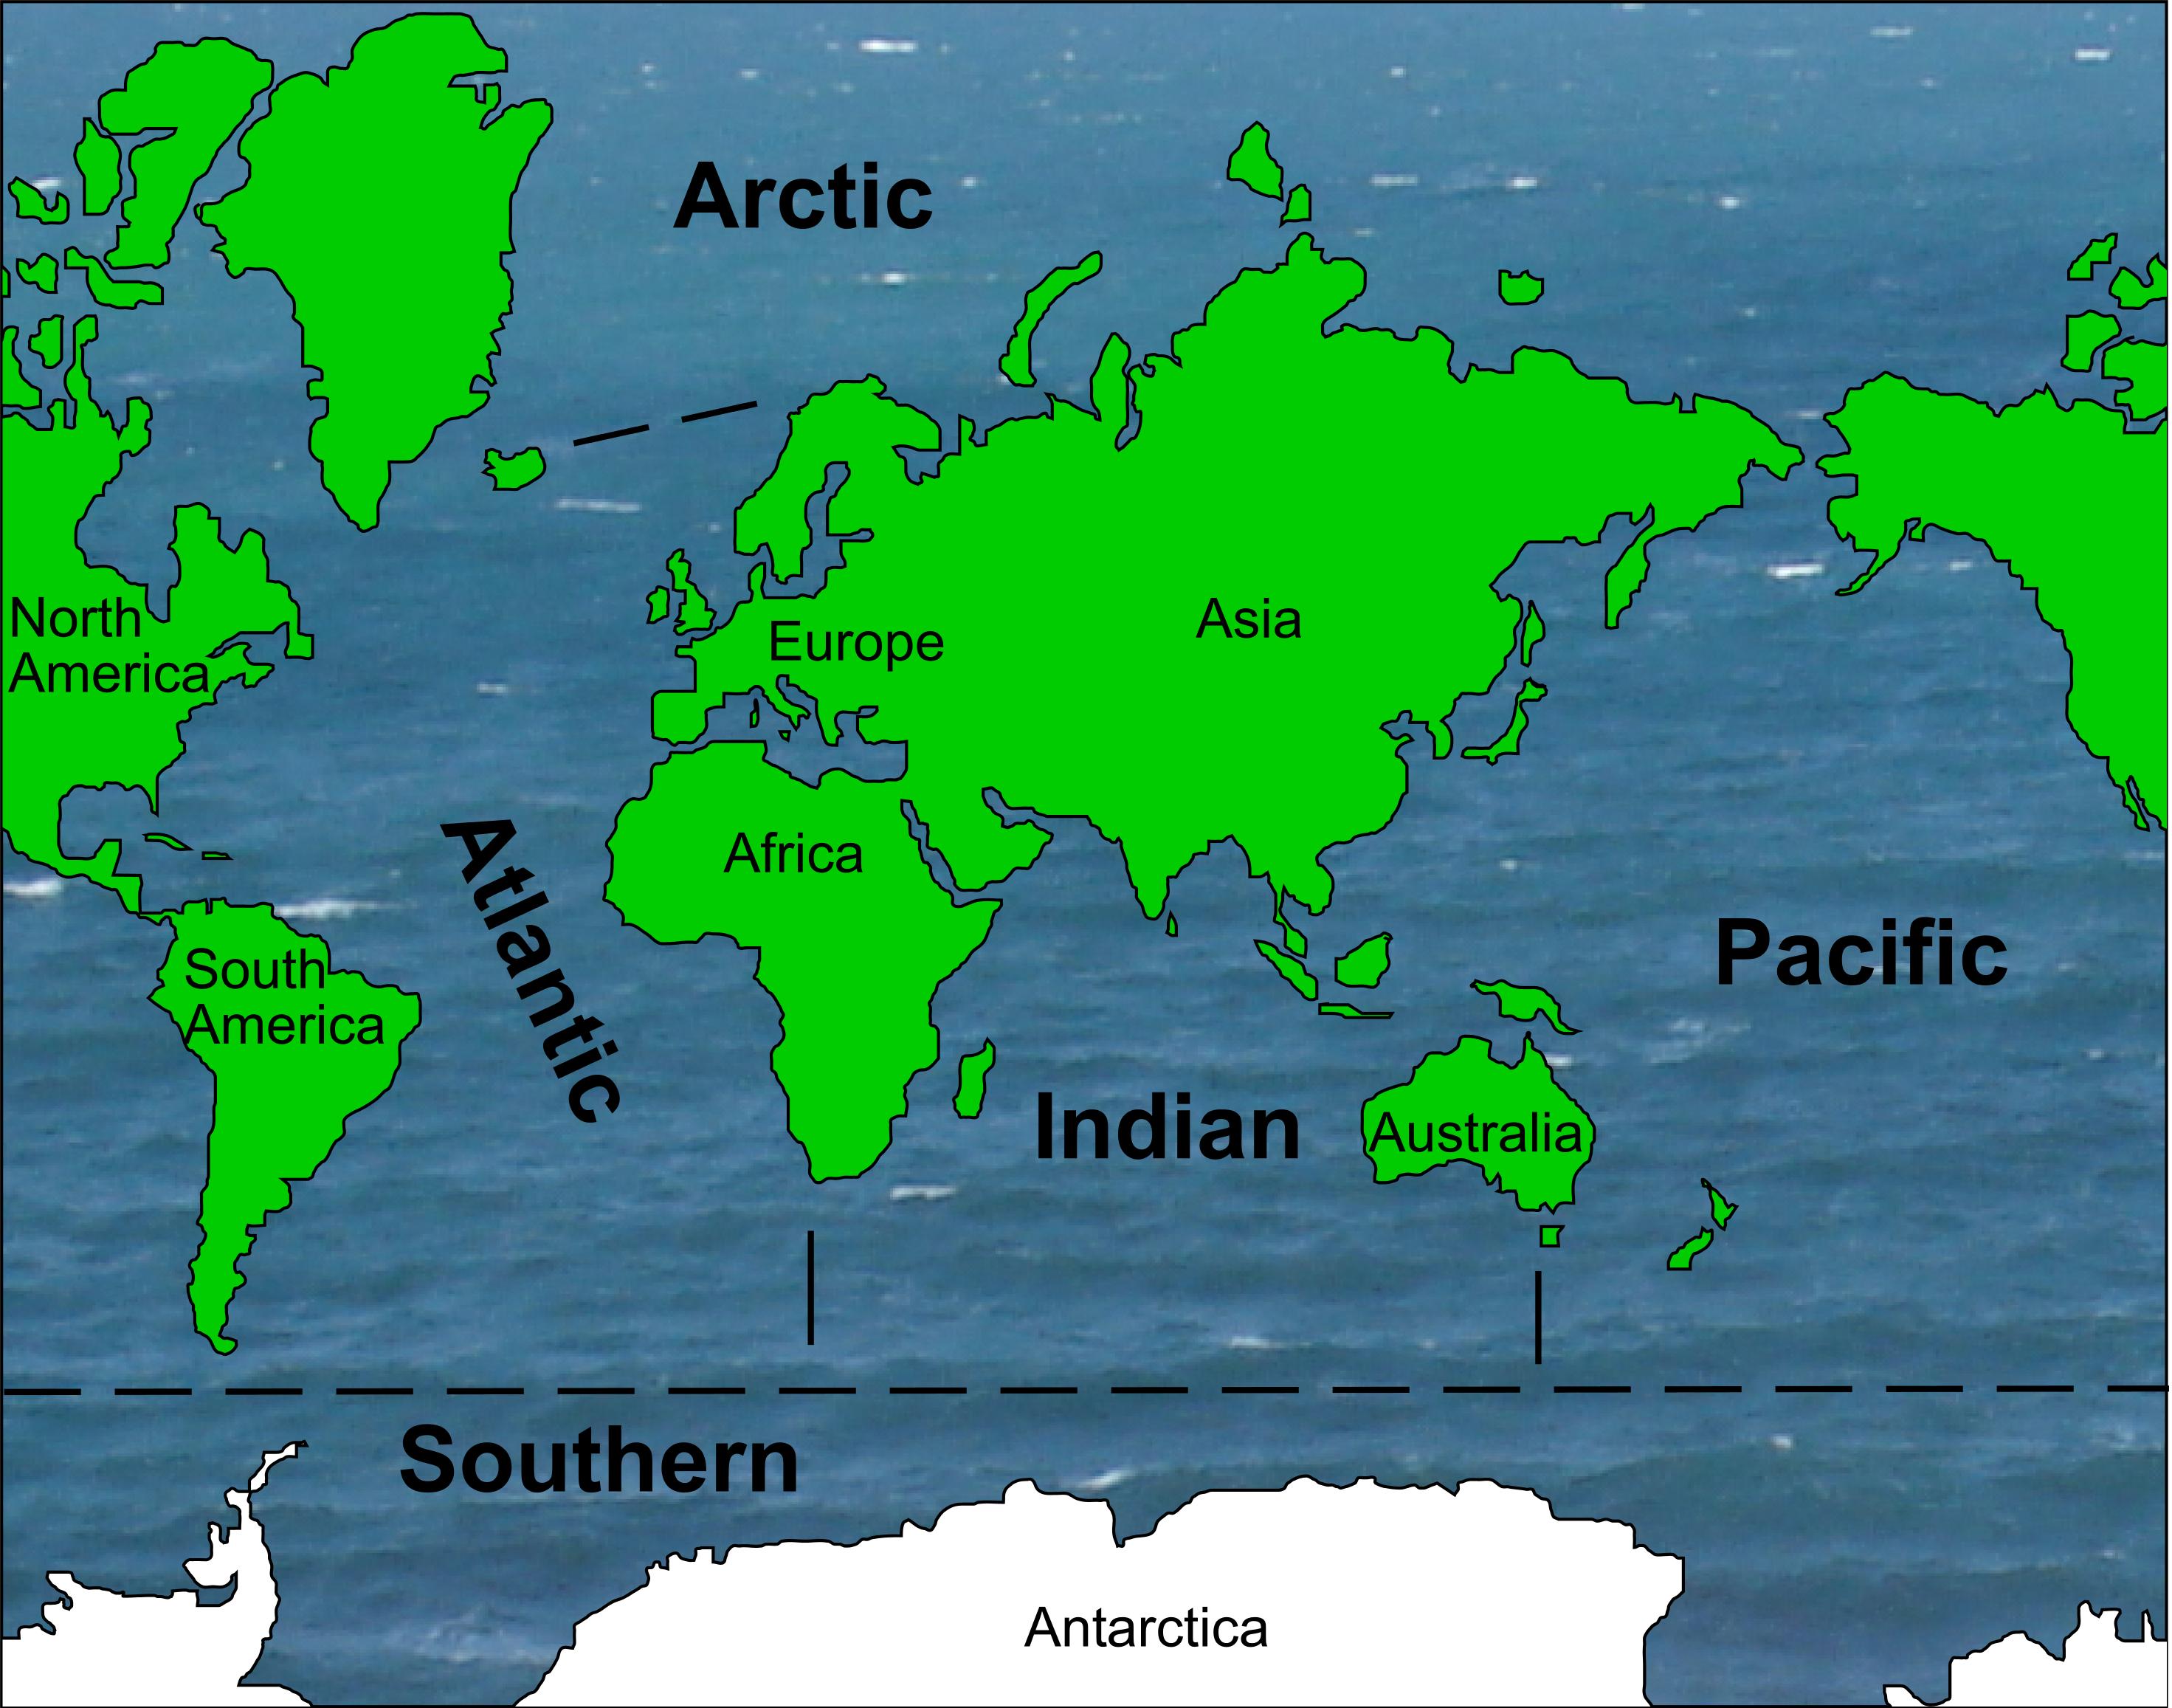 Five Oceans of the World